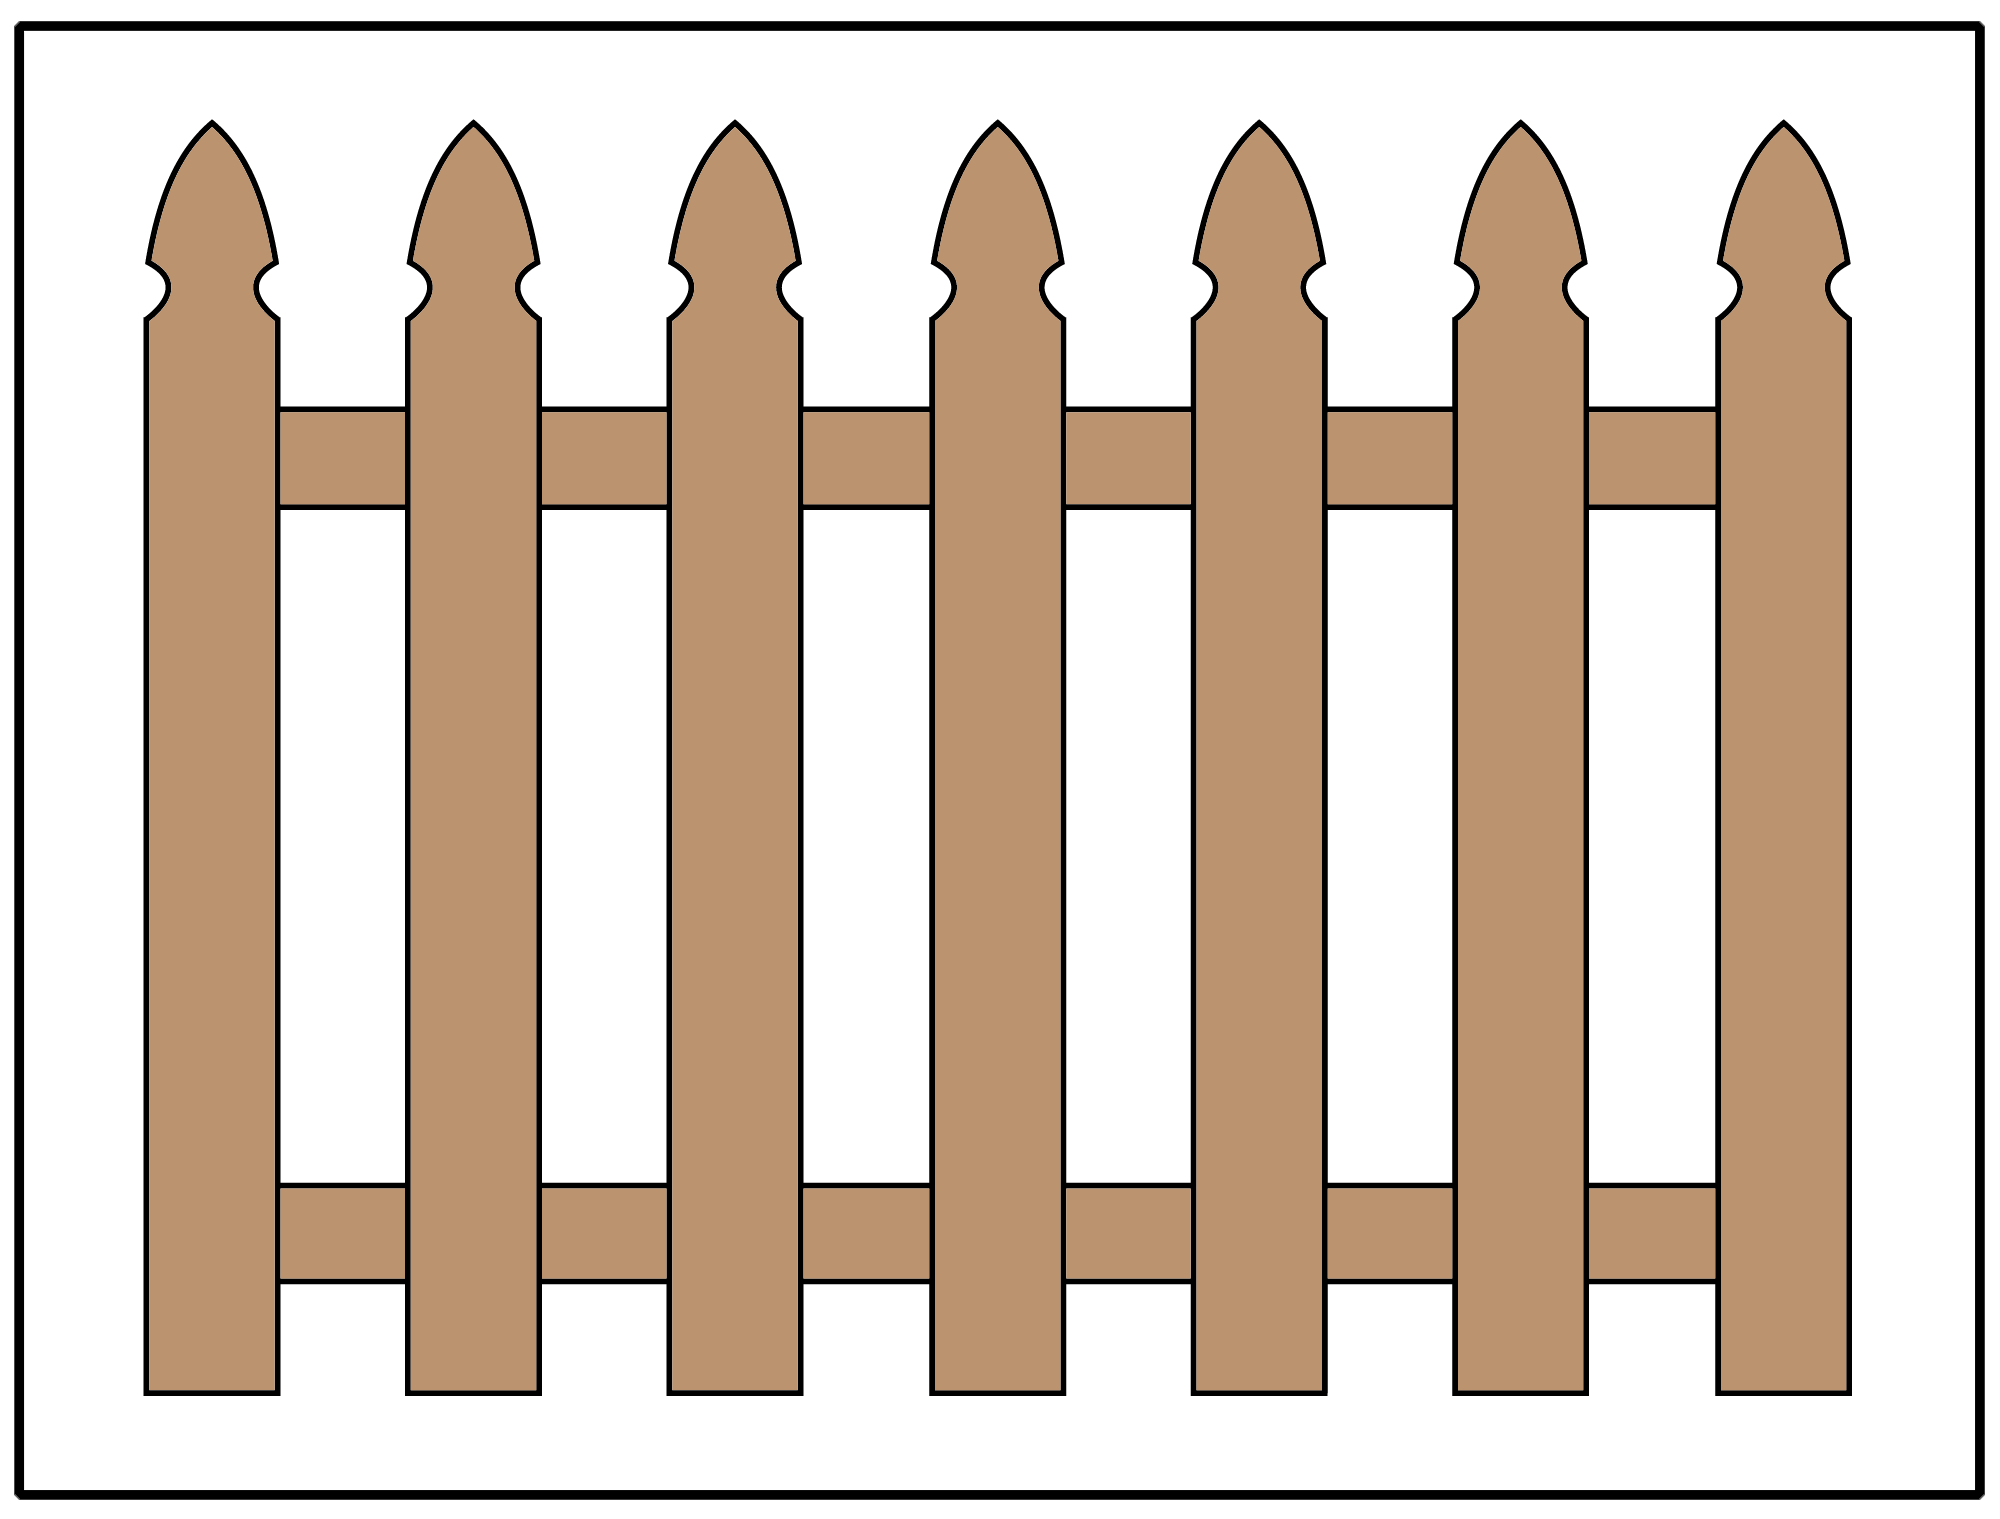 Illustration of a picket fence design using gothic pickets